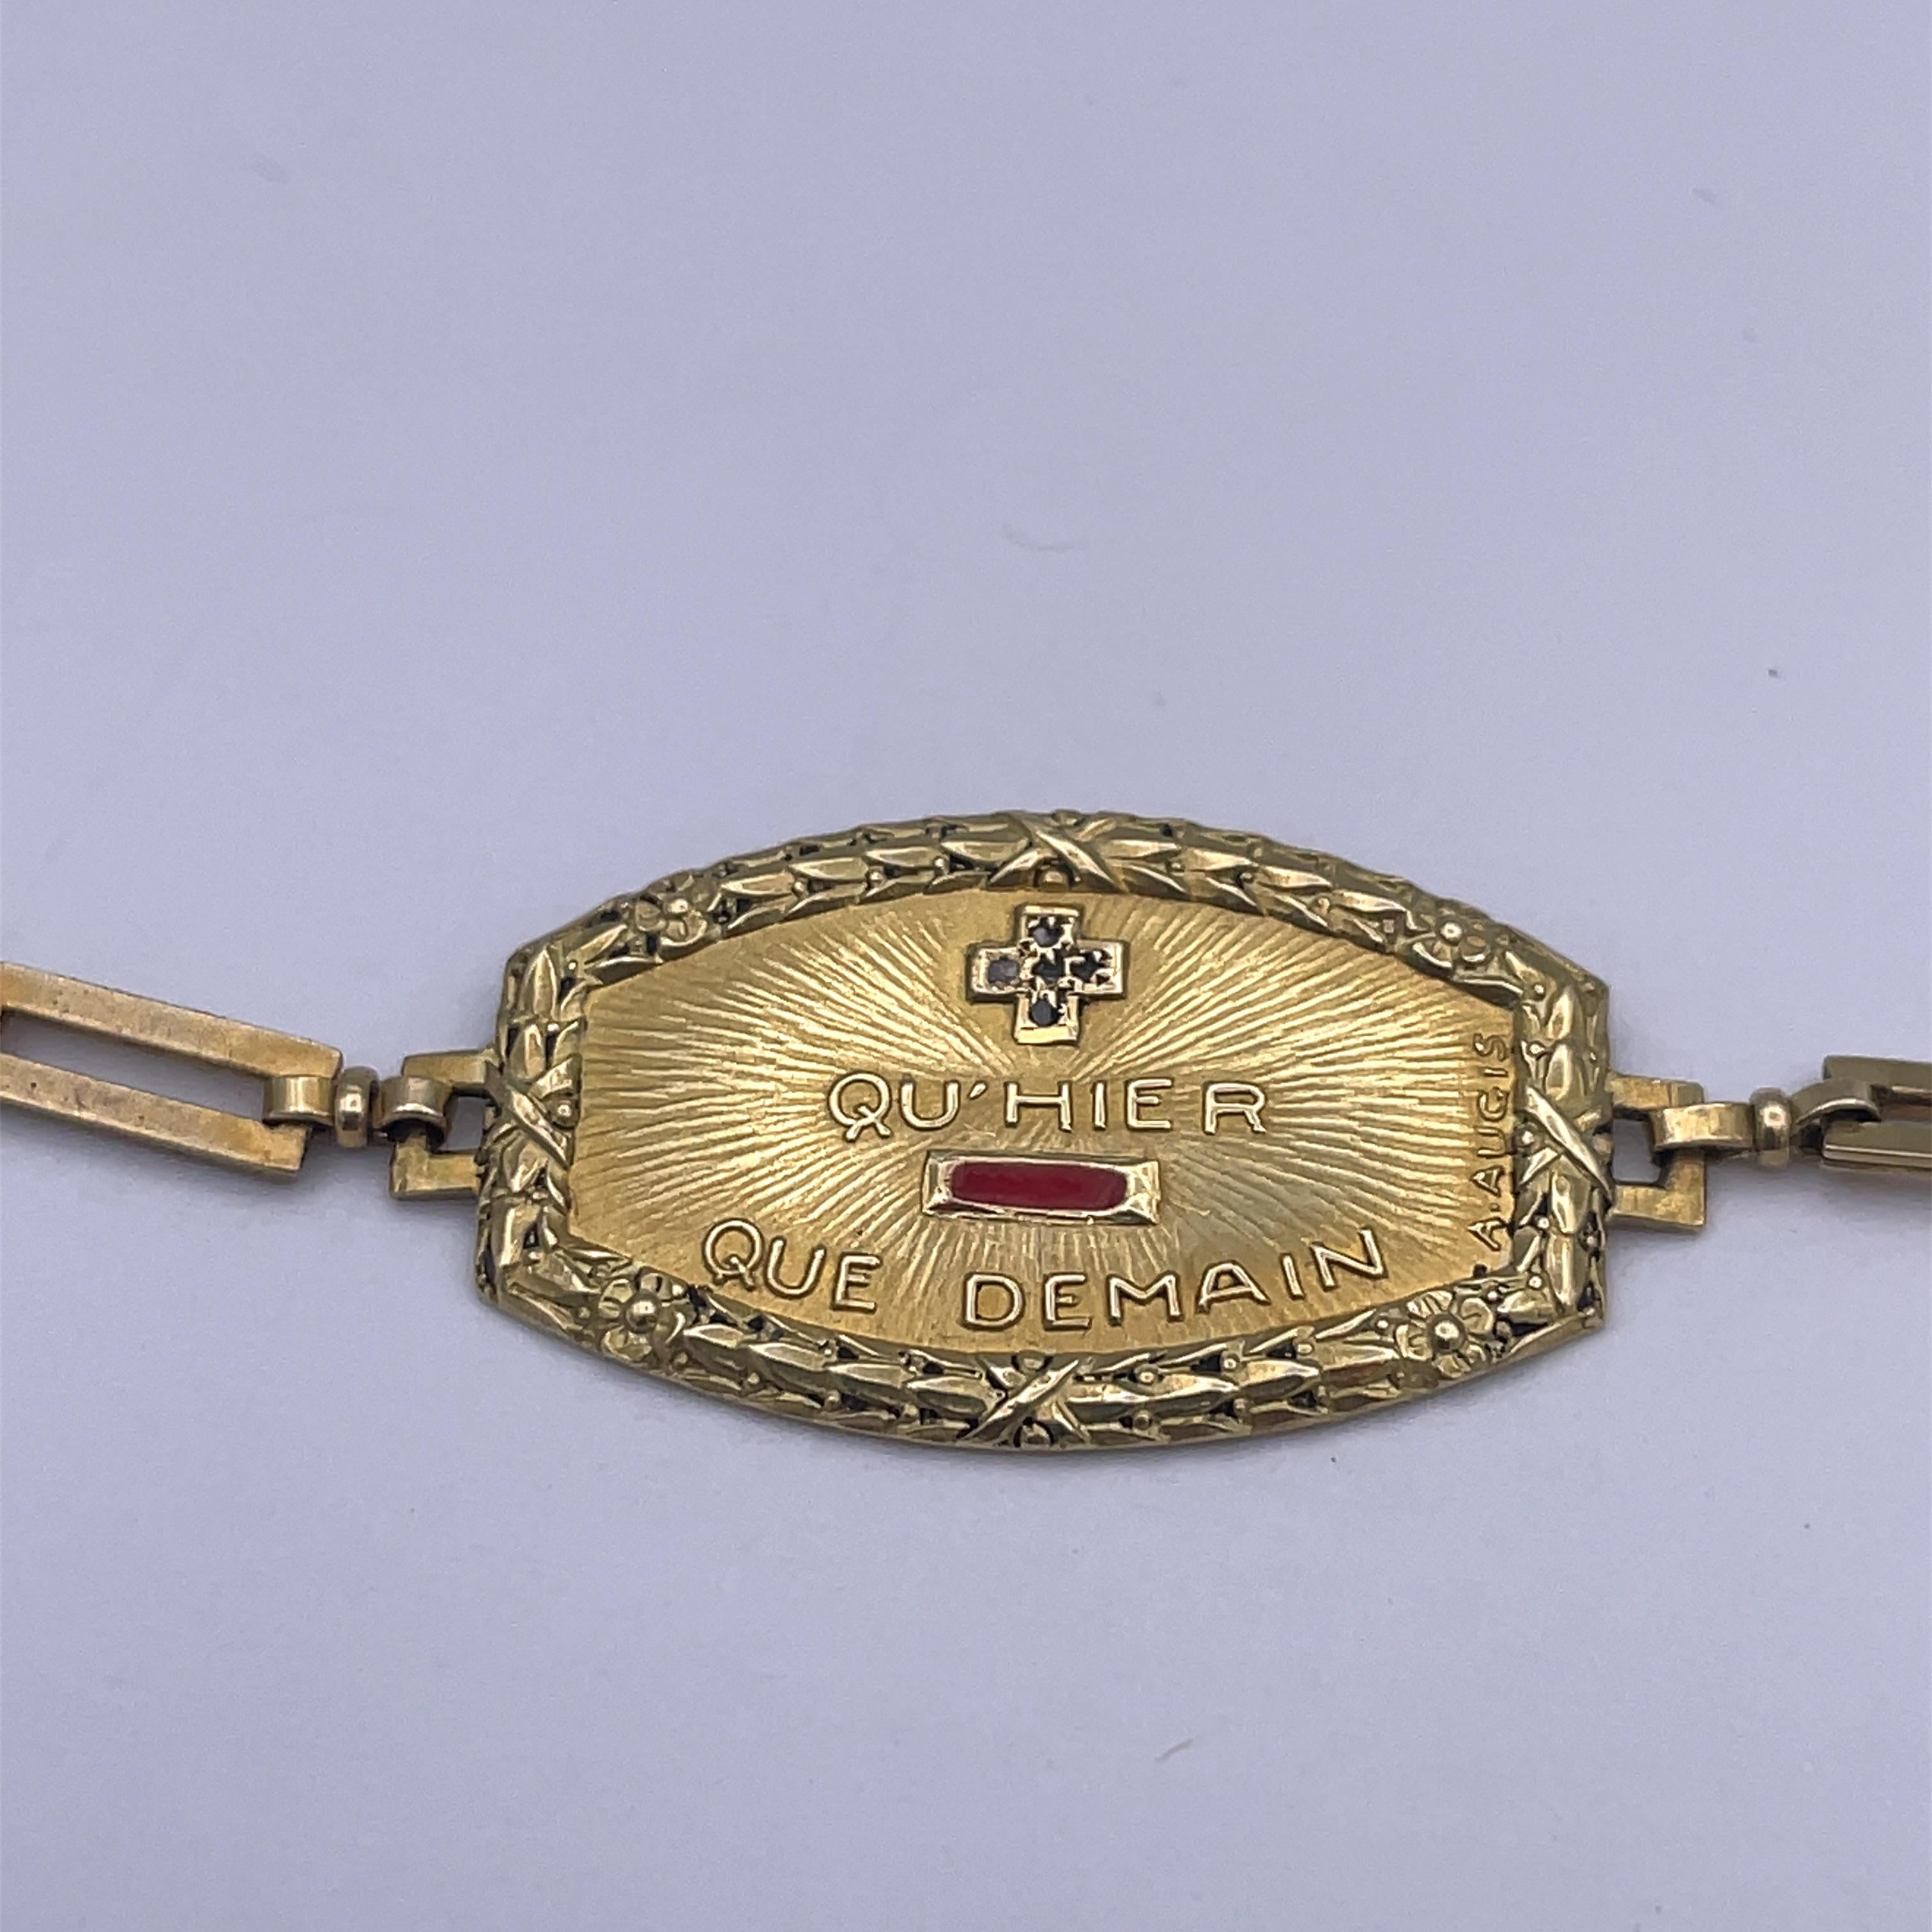 Exceedingly rare antique bracelet: The center cartouche is set with an applied + (plus) sign,  set with rose diamonds, and an applied - (minus) sign, with red enamel.
Applied laurel leaf border.  On a fine open link 7